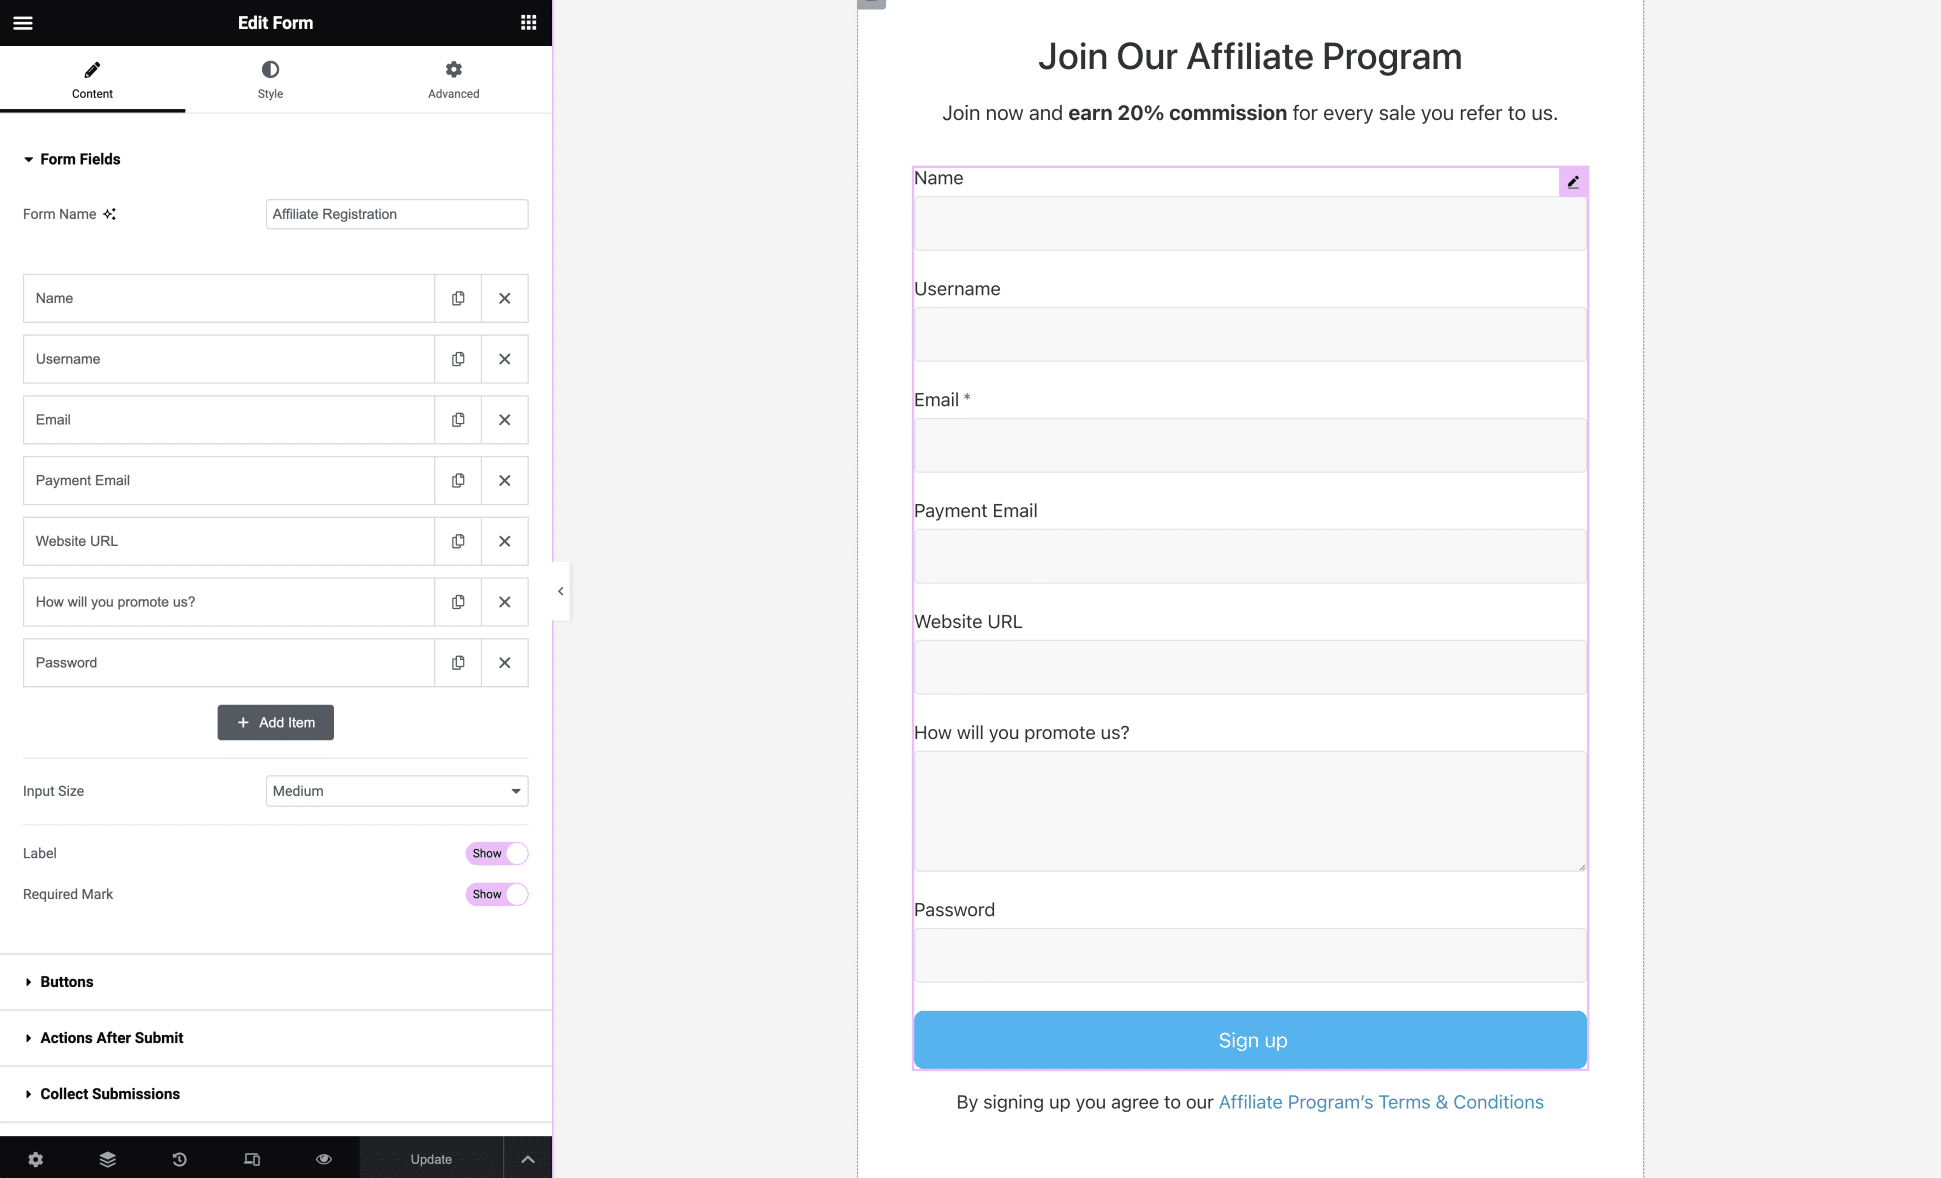 Editing an Elementor Form widget to create an affiliate registration form